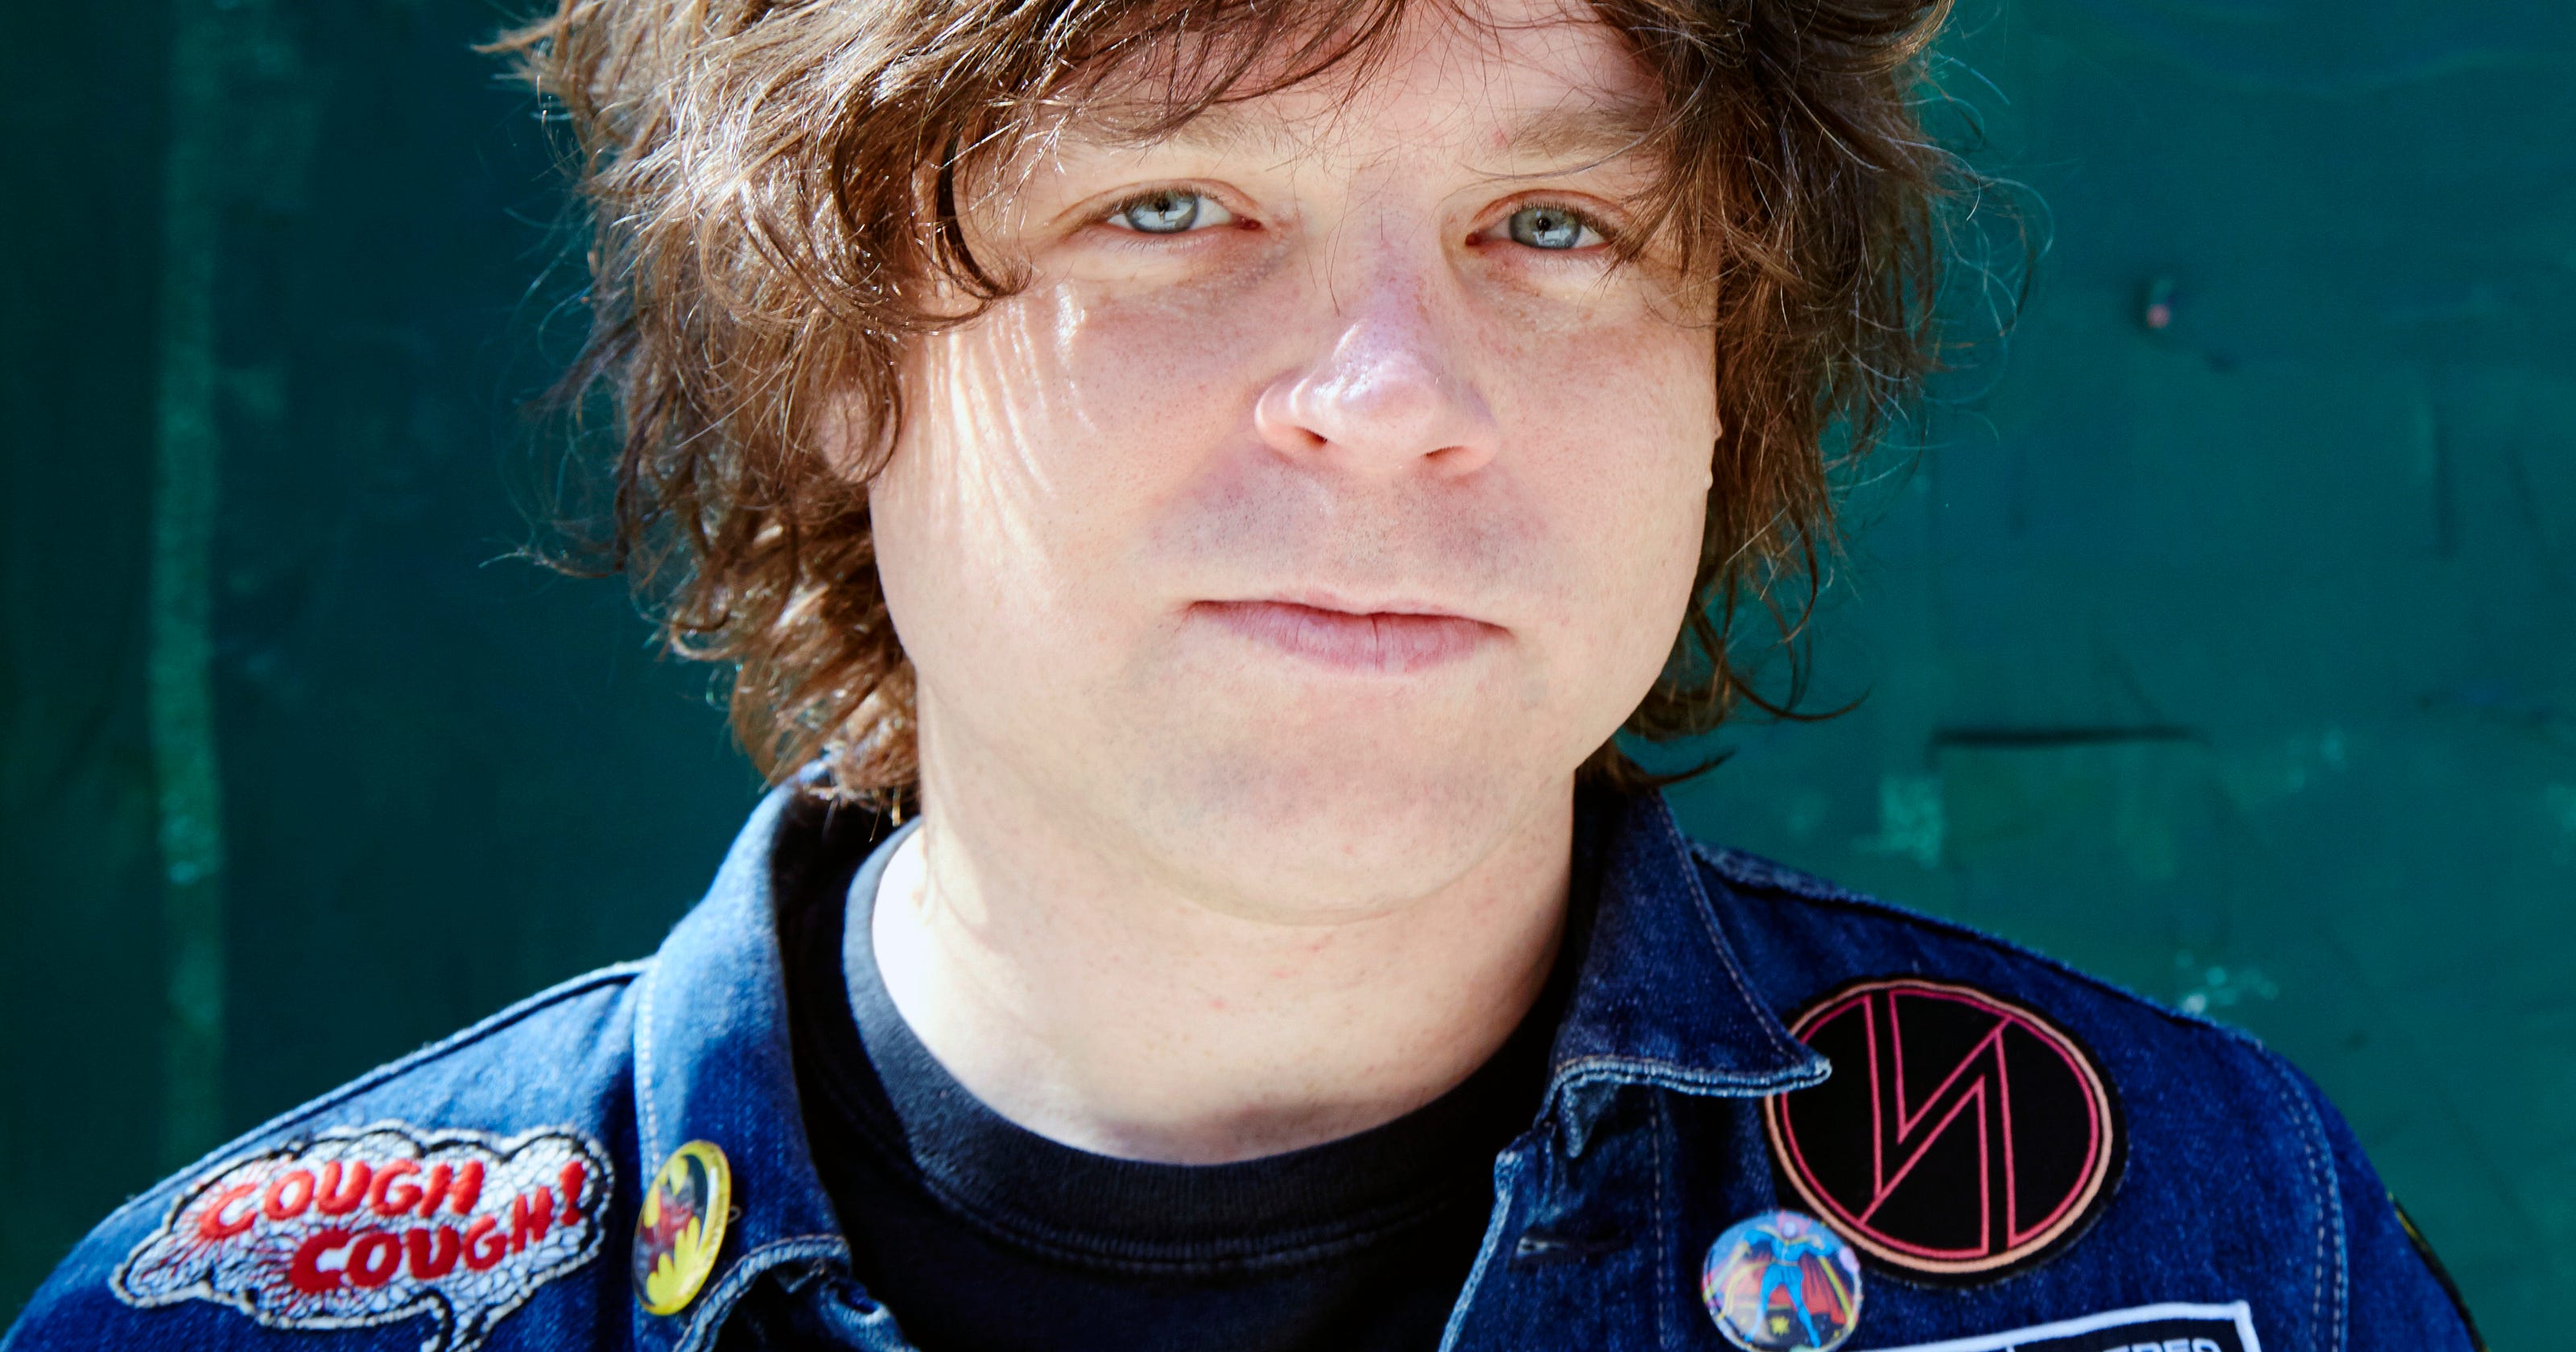 Ryan Adams breaks silence months after sexual misconduct allegations